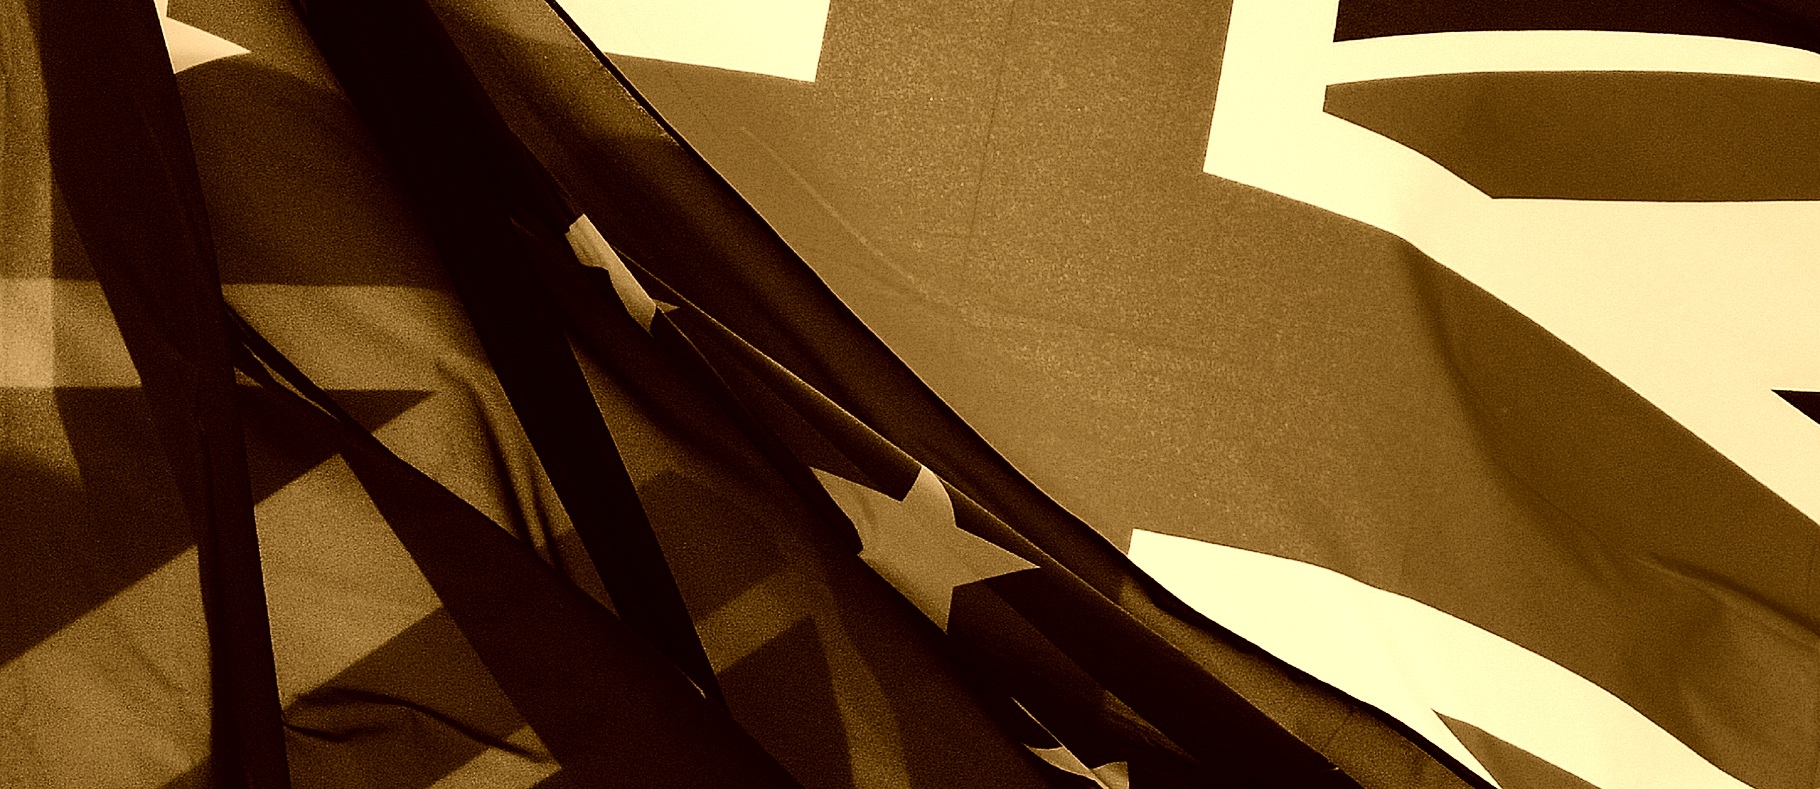 A UK and EU flag in sepia